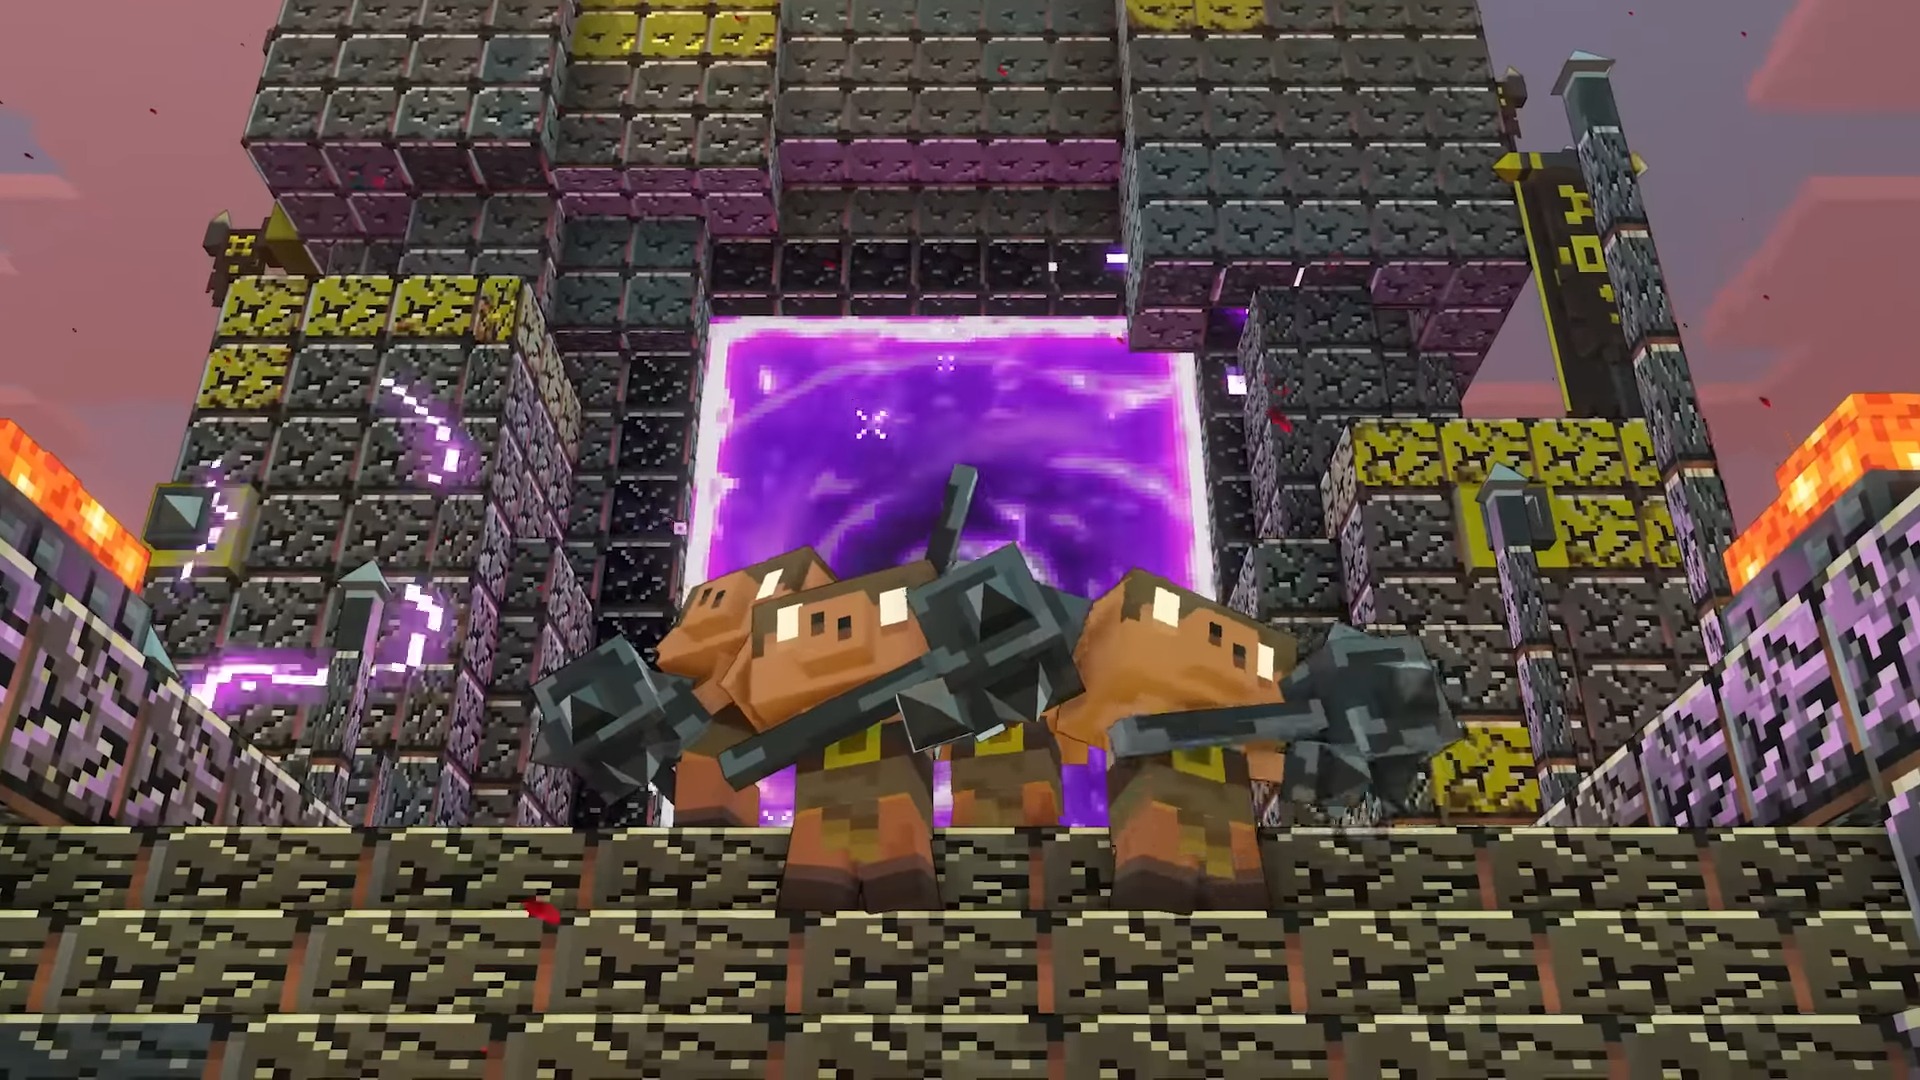 Piglins defending the Nether portal